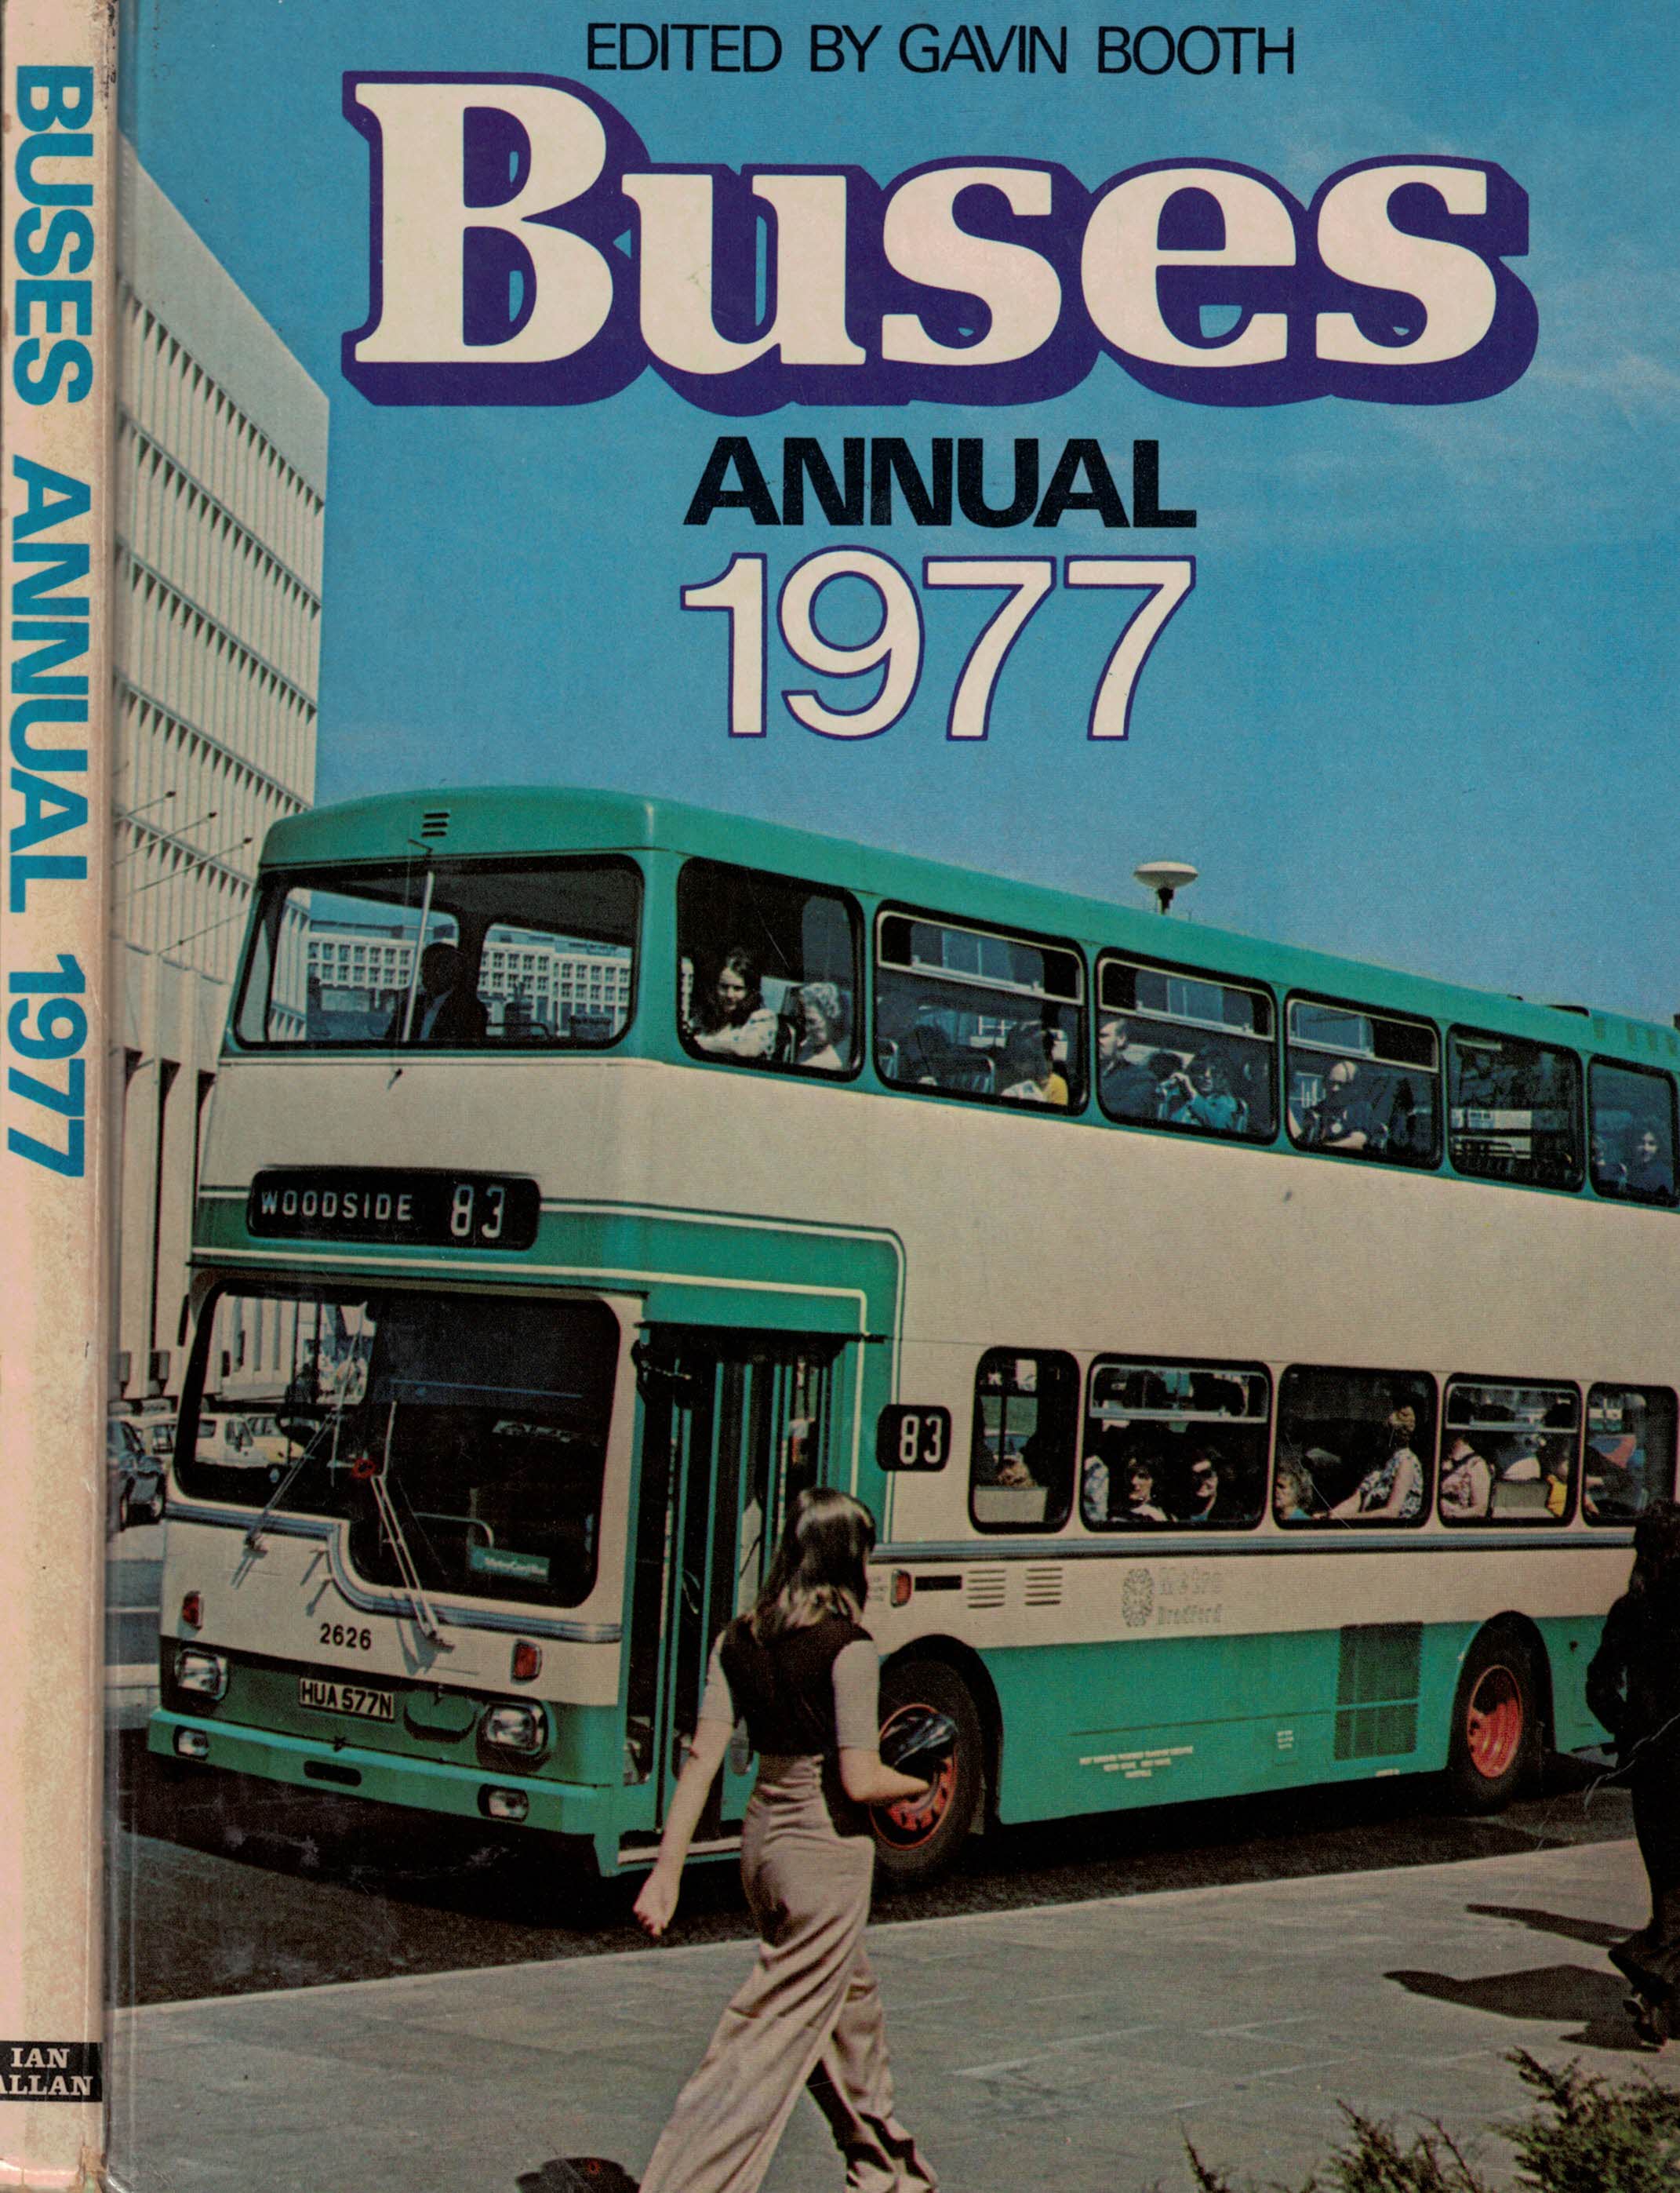 Buses Annual 1977